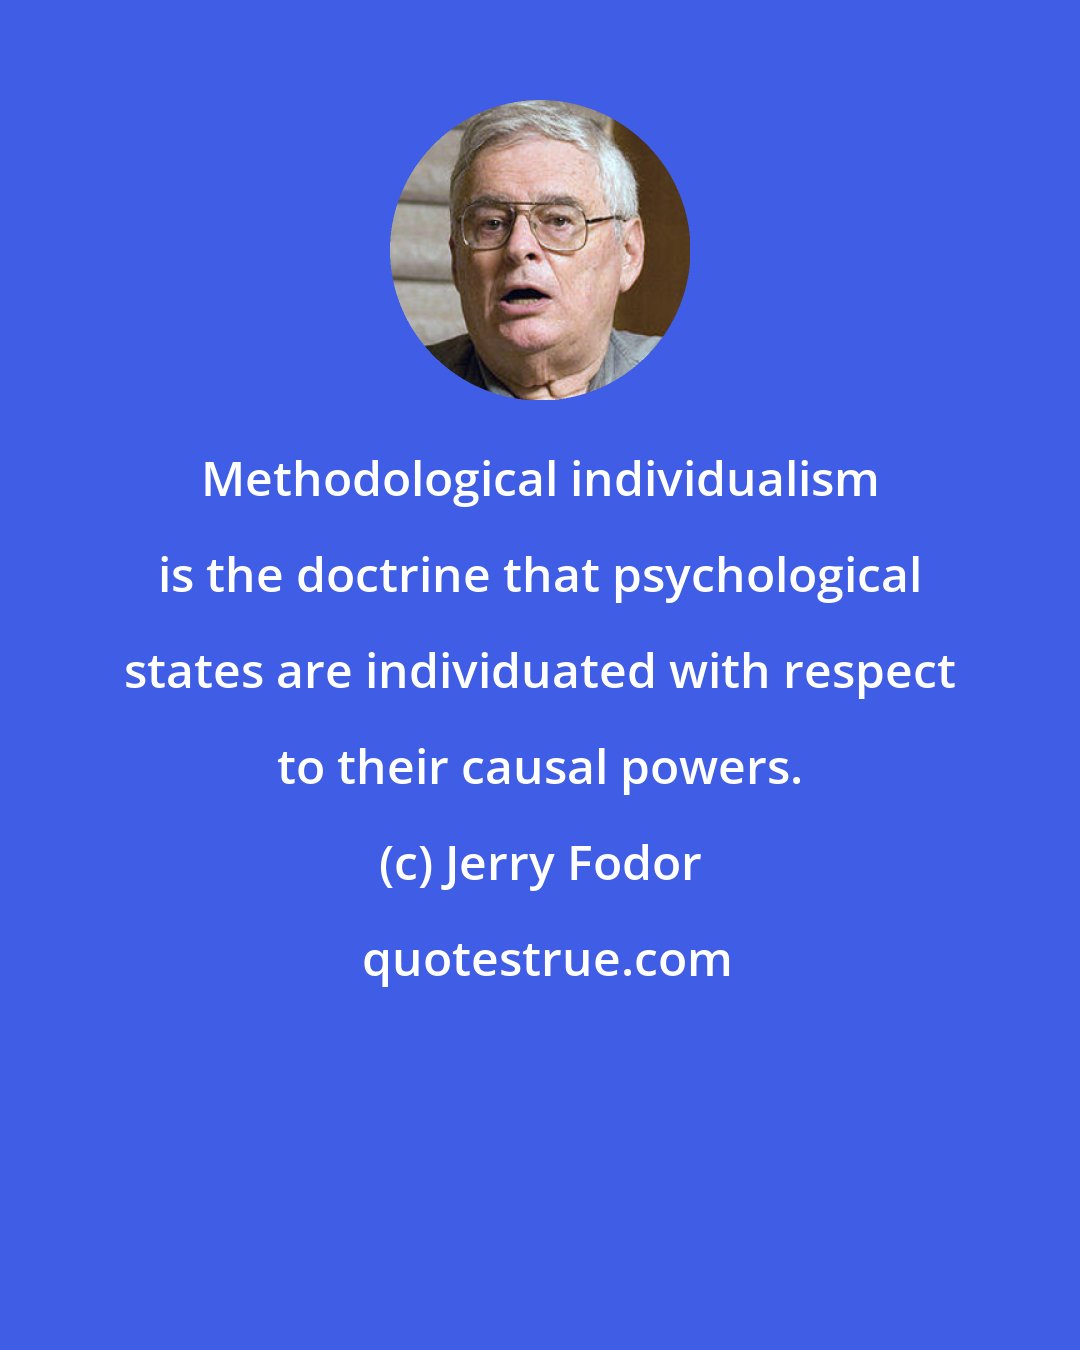 Jerry Fodor: Methodological individualism is the doctrine that psychological states are individuated with respect to their causal powers.